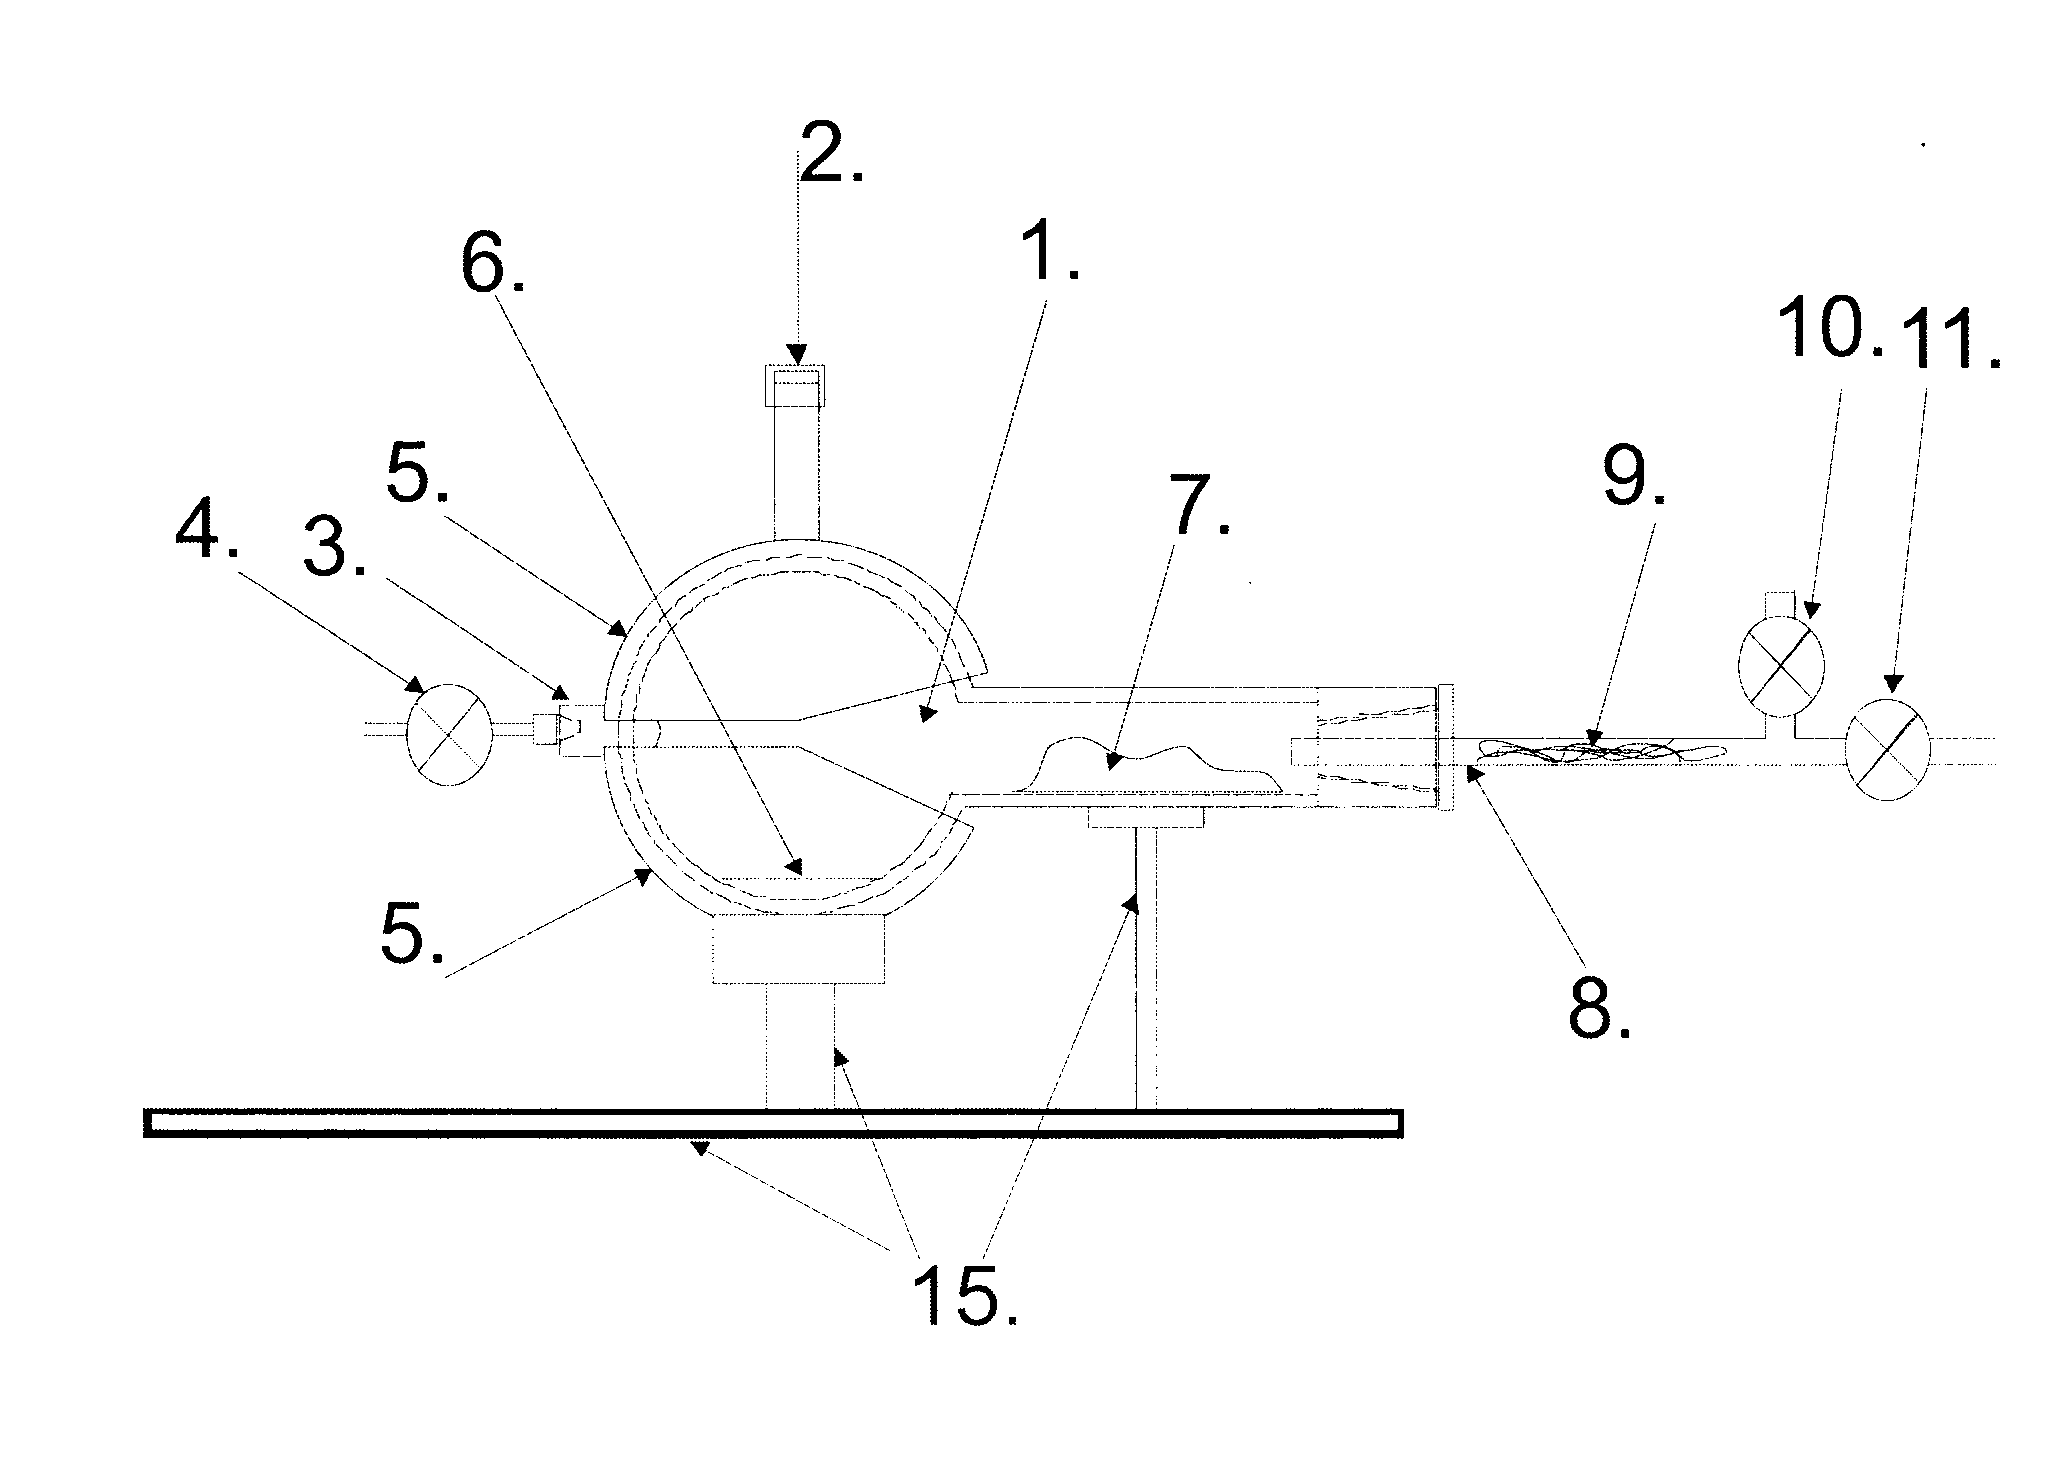 Alcohol thermal dehydratation chamber, apparatus and method for determination of isotopic composition of non-exchangeable hydrogen and deuterium atoms in ethanol samples